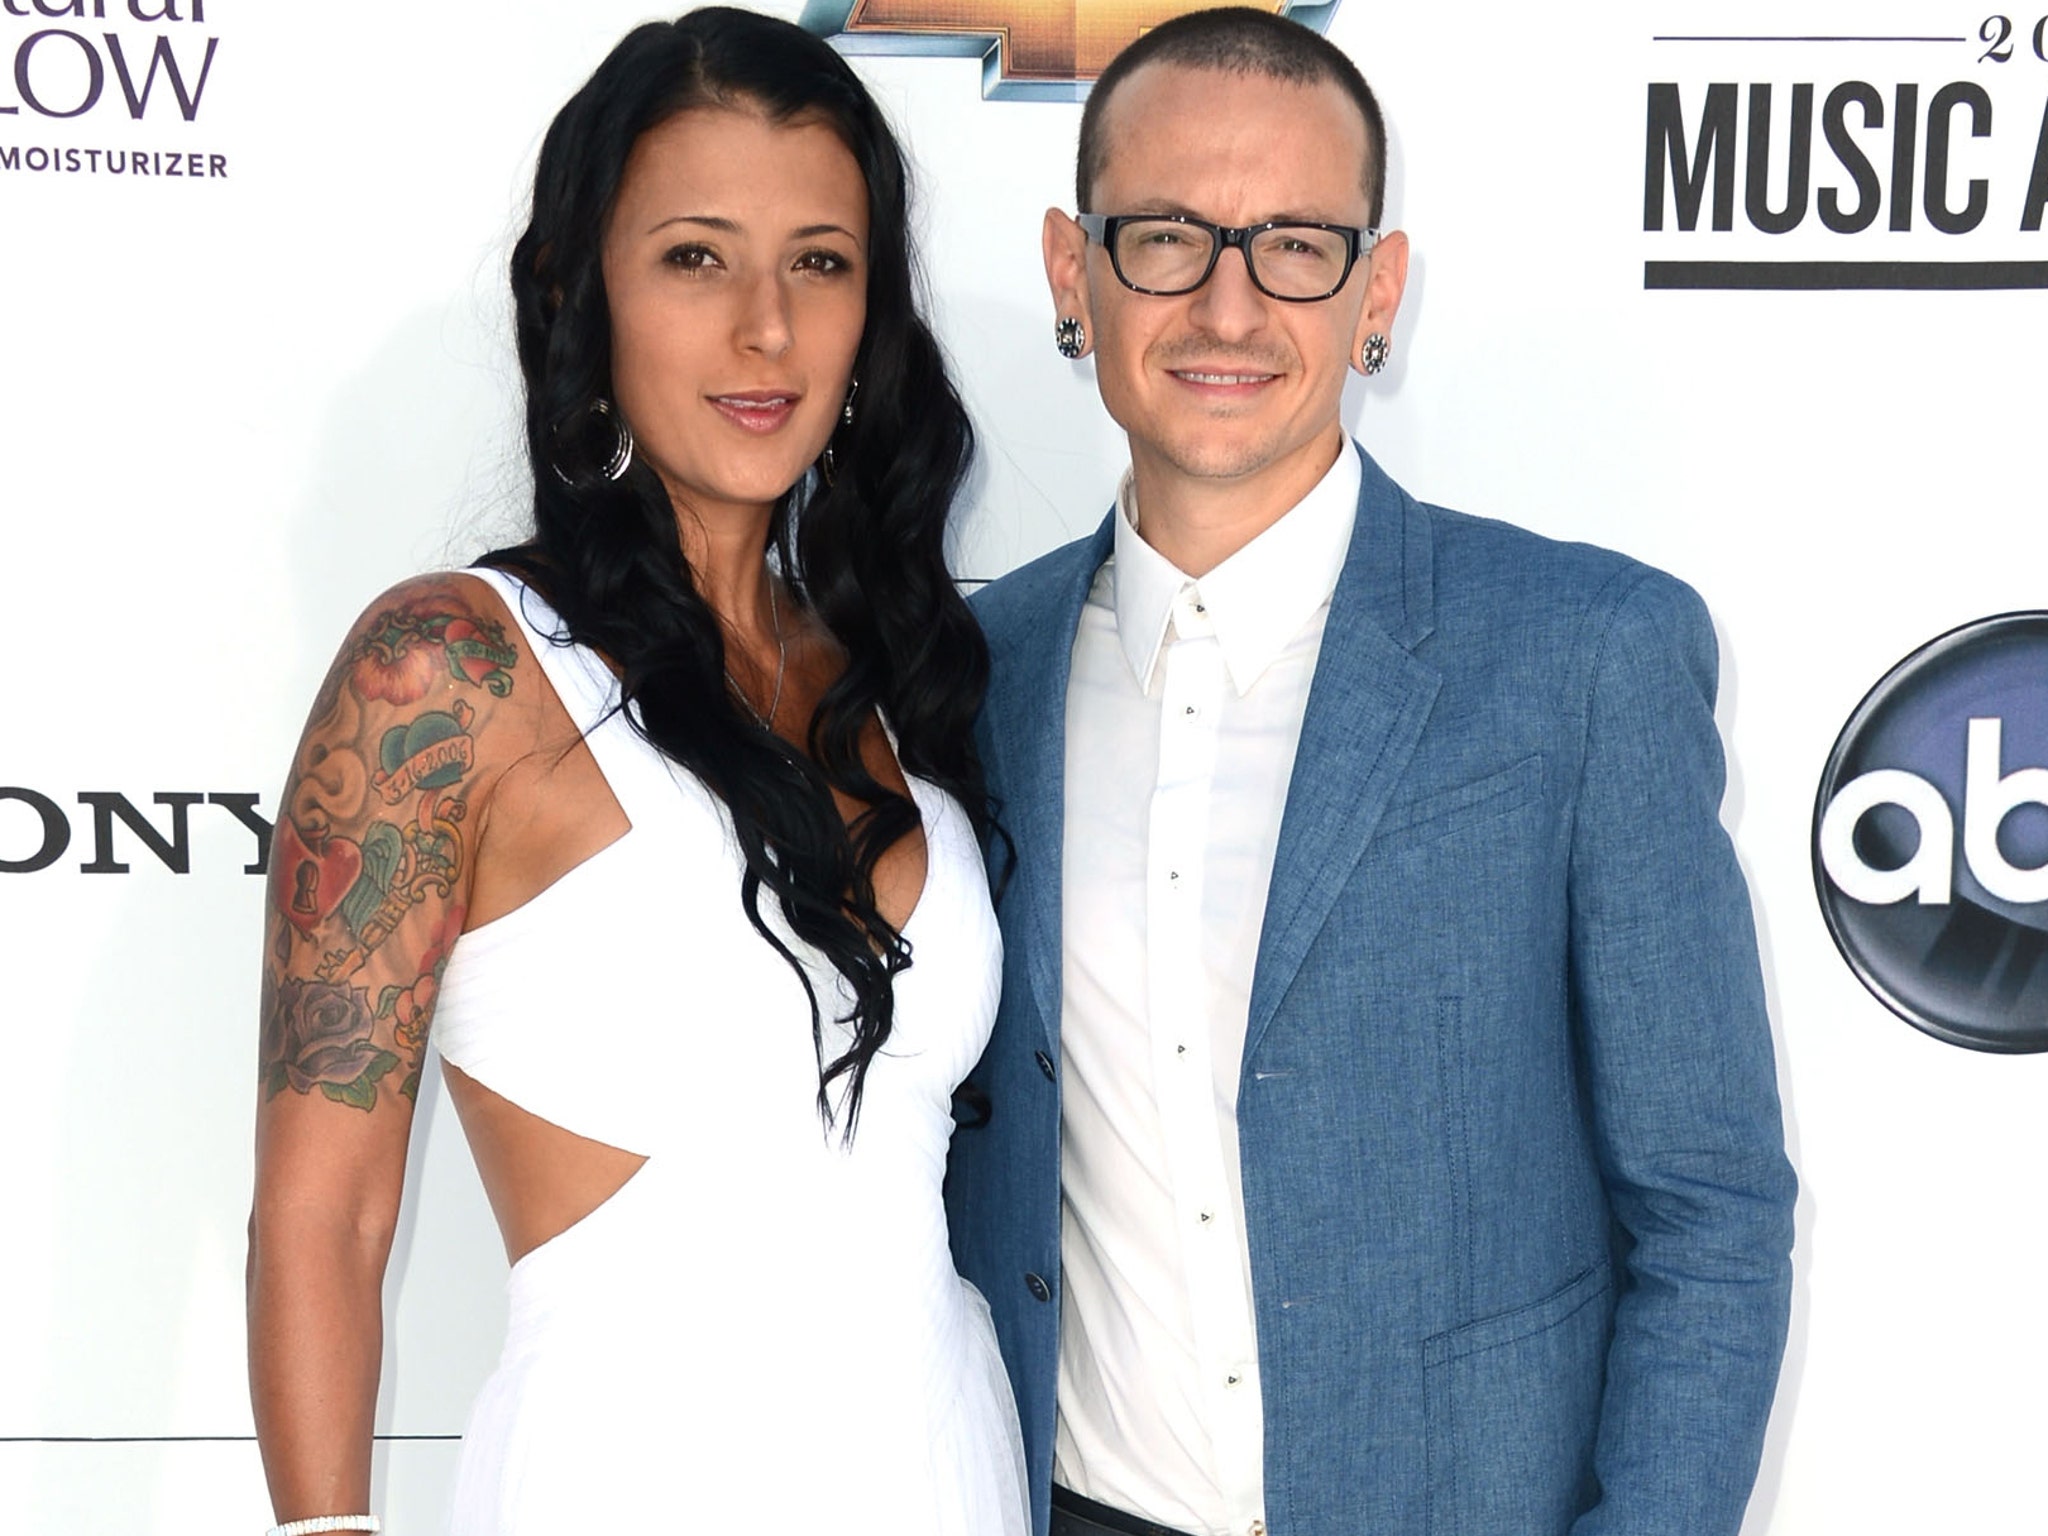 Linkin Park singer Chester Bennington commits suicide:Top 7 lesser known  facts about him - IBTimes India